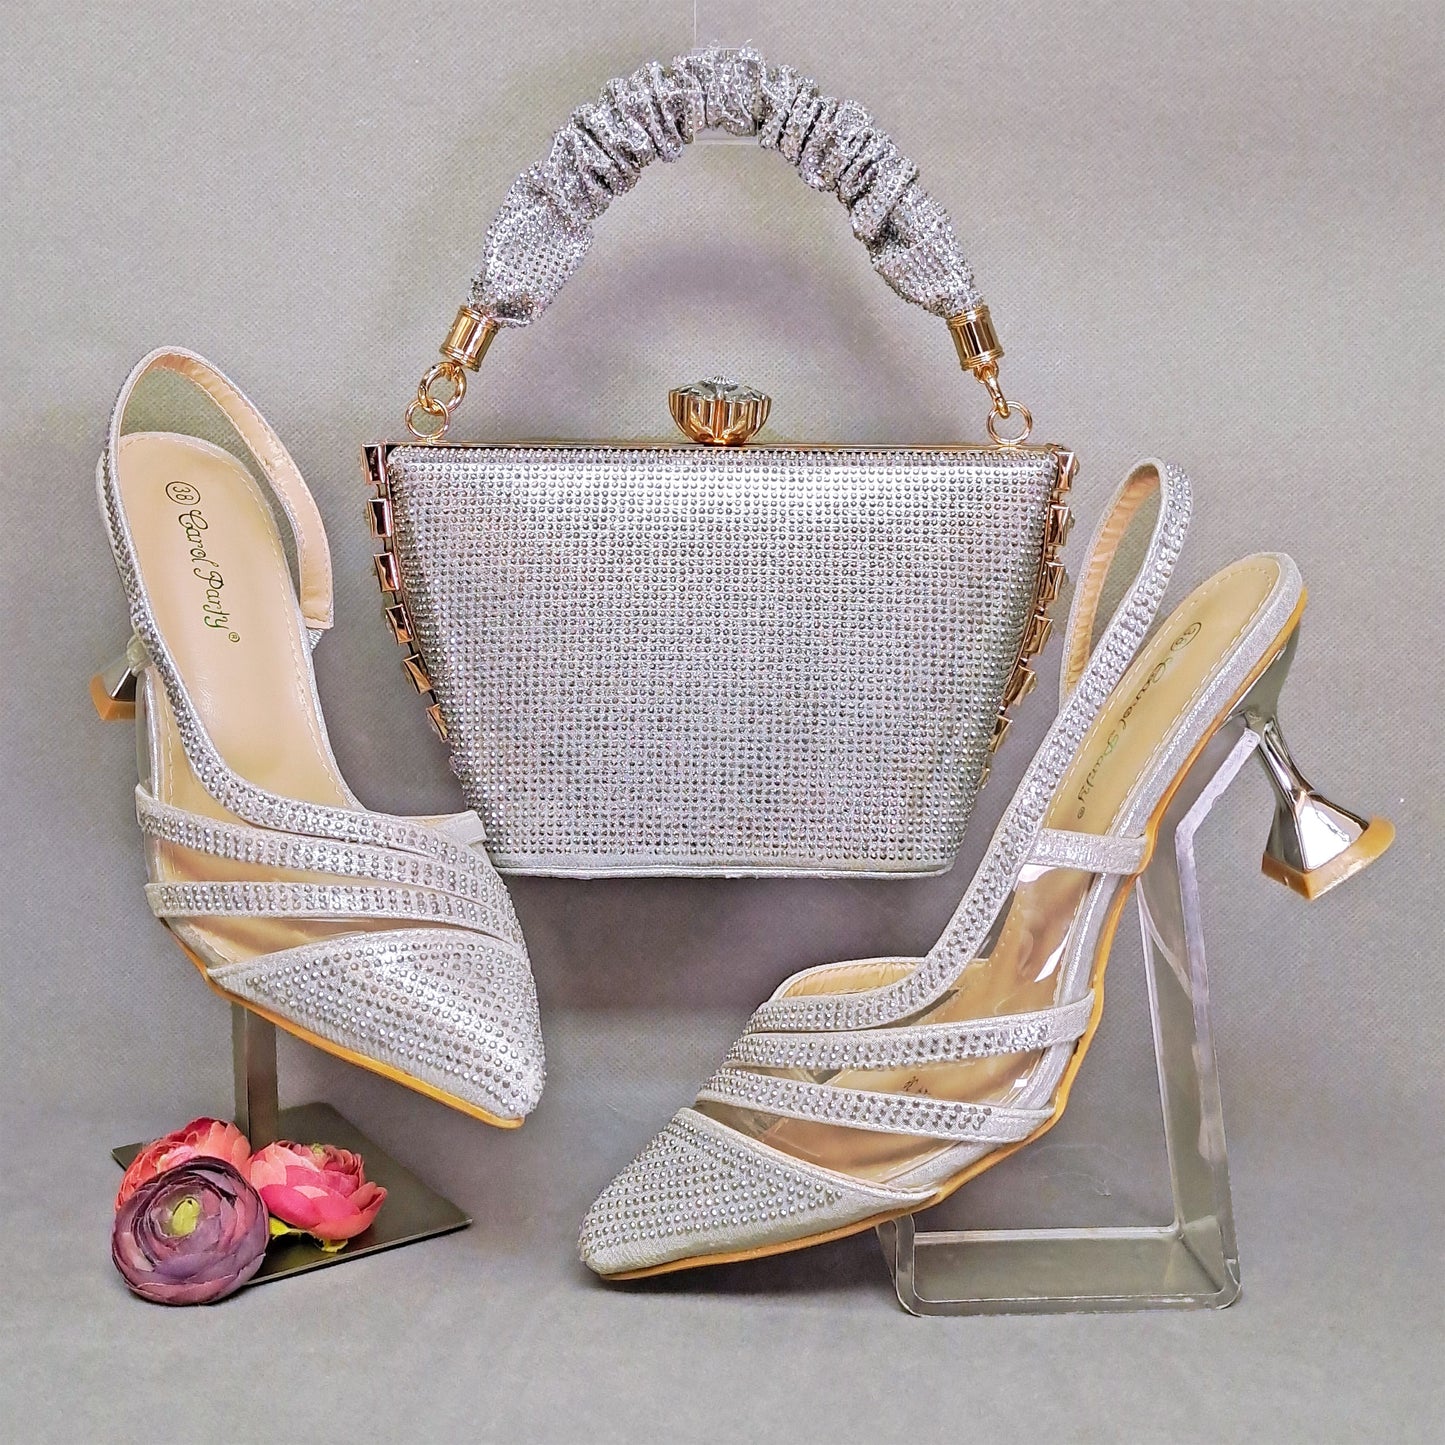 Shoes with Matching Bags Italian Design gold Shoes